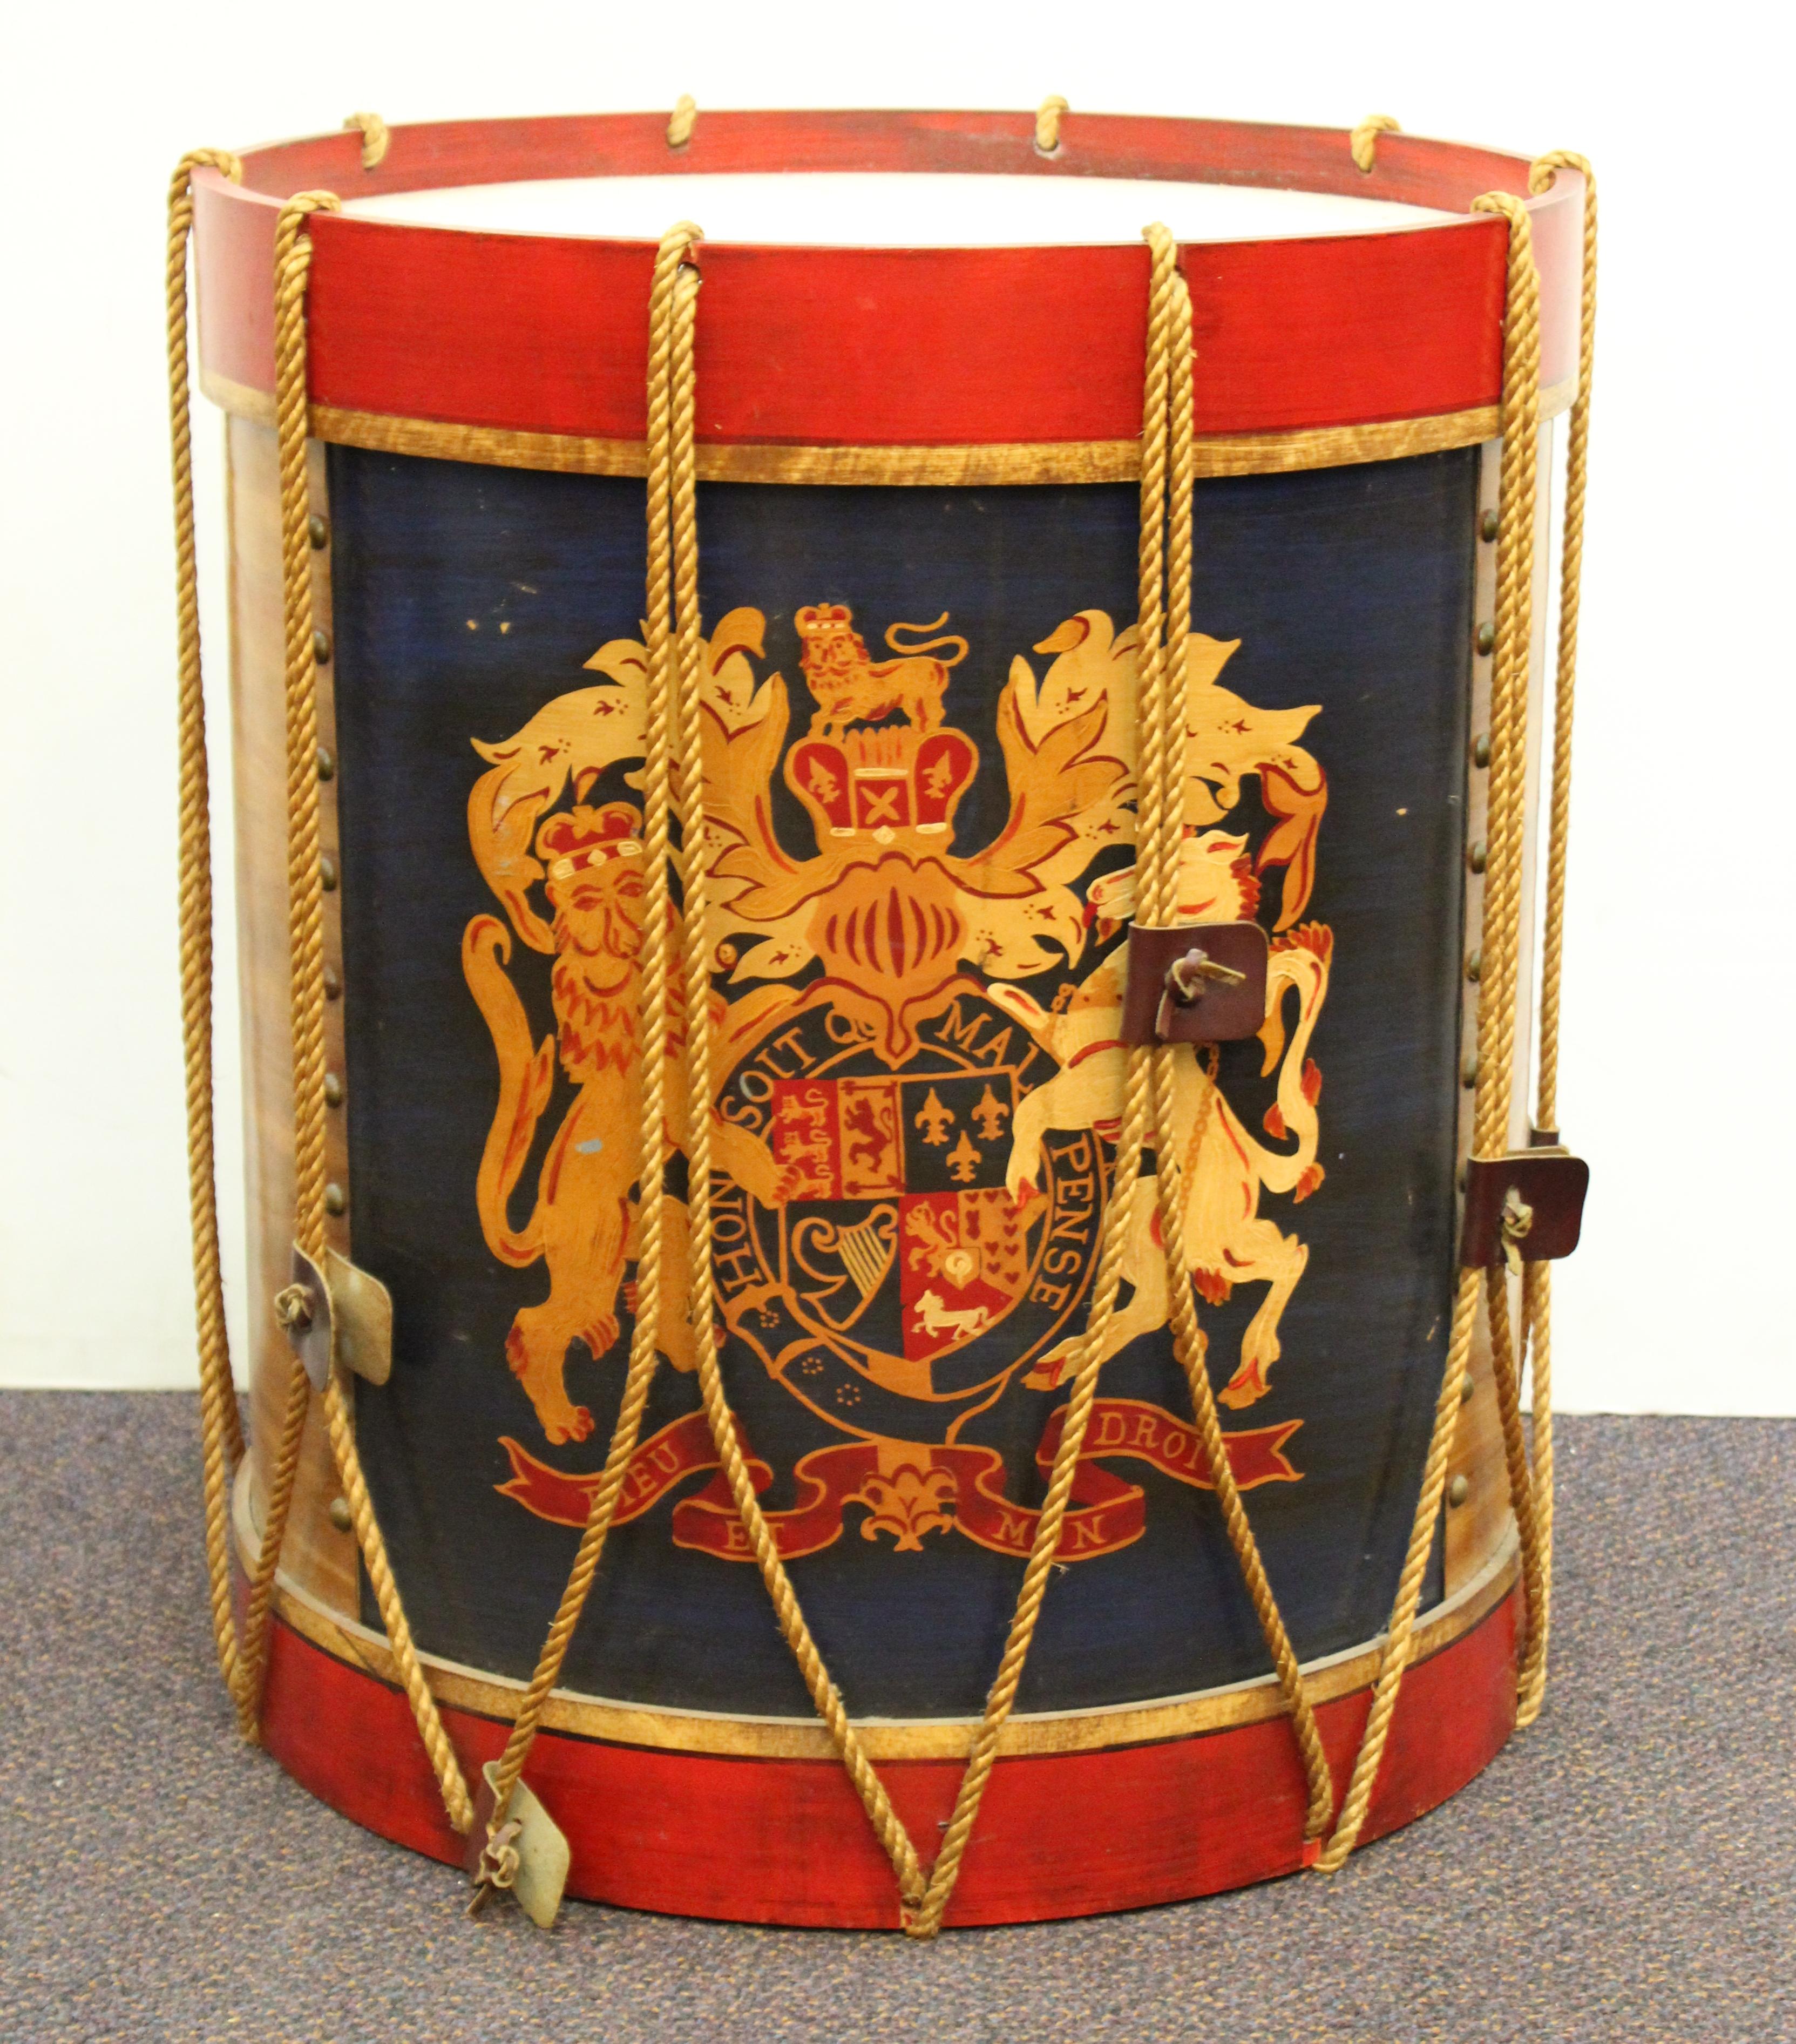 Hollywood Regency style pair of side or end tables in the shape of regimental British drums. The pair has cord and leather detailing and hand-painted British coat of arms. Some of the leather detailing is missing and a few of them are missing. In